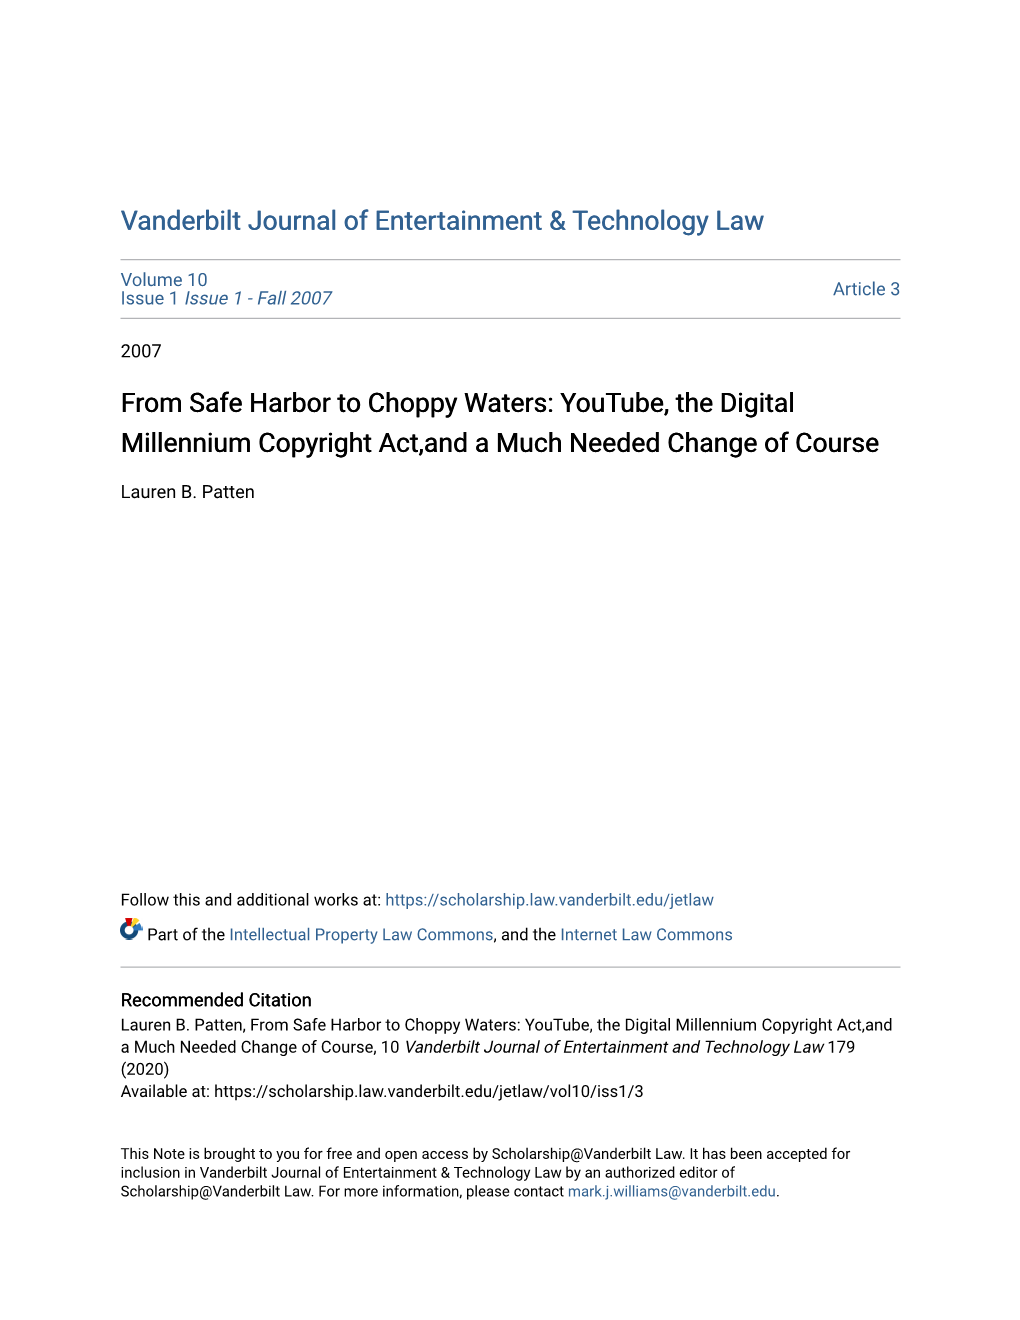 From Safe Harbor to Choppy Waters: Youtube, the Digital Millennium Copyright Act,And a Much Needed Change of Course